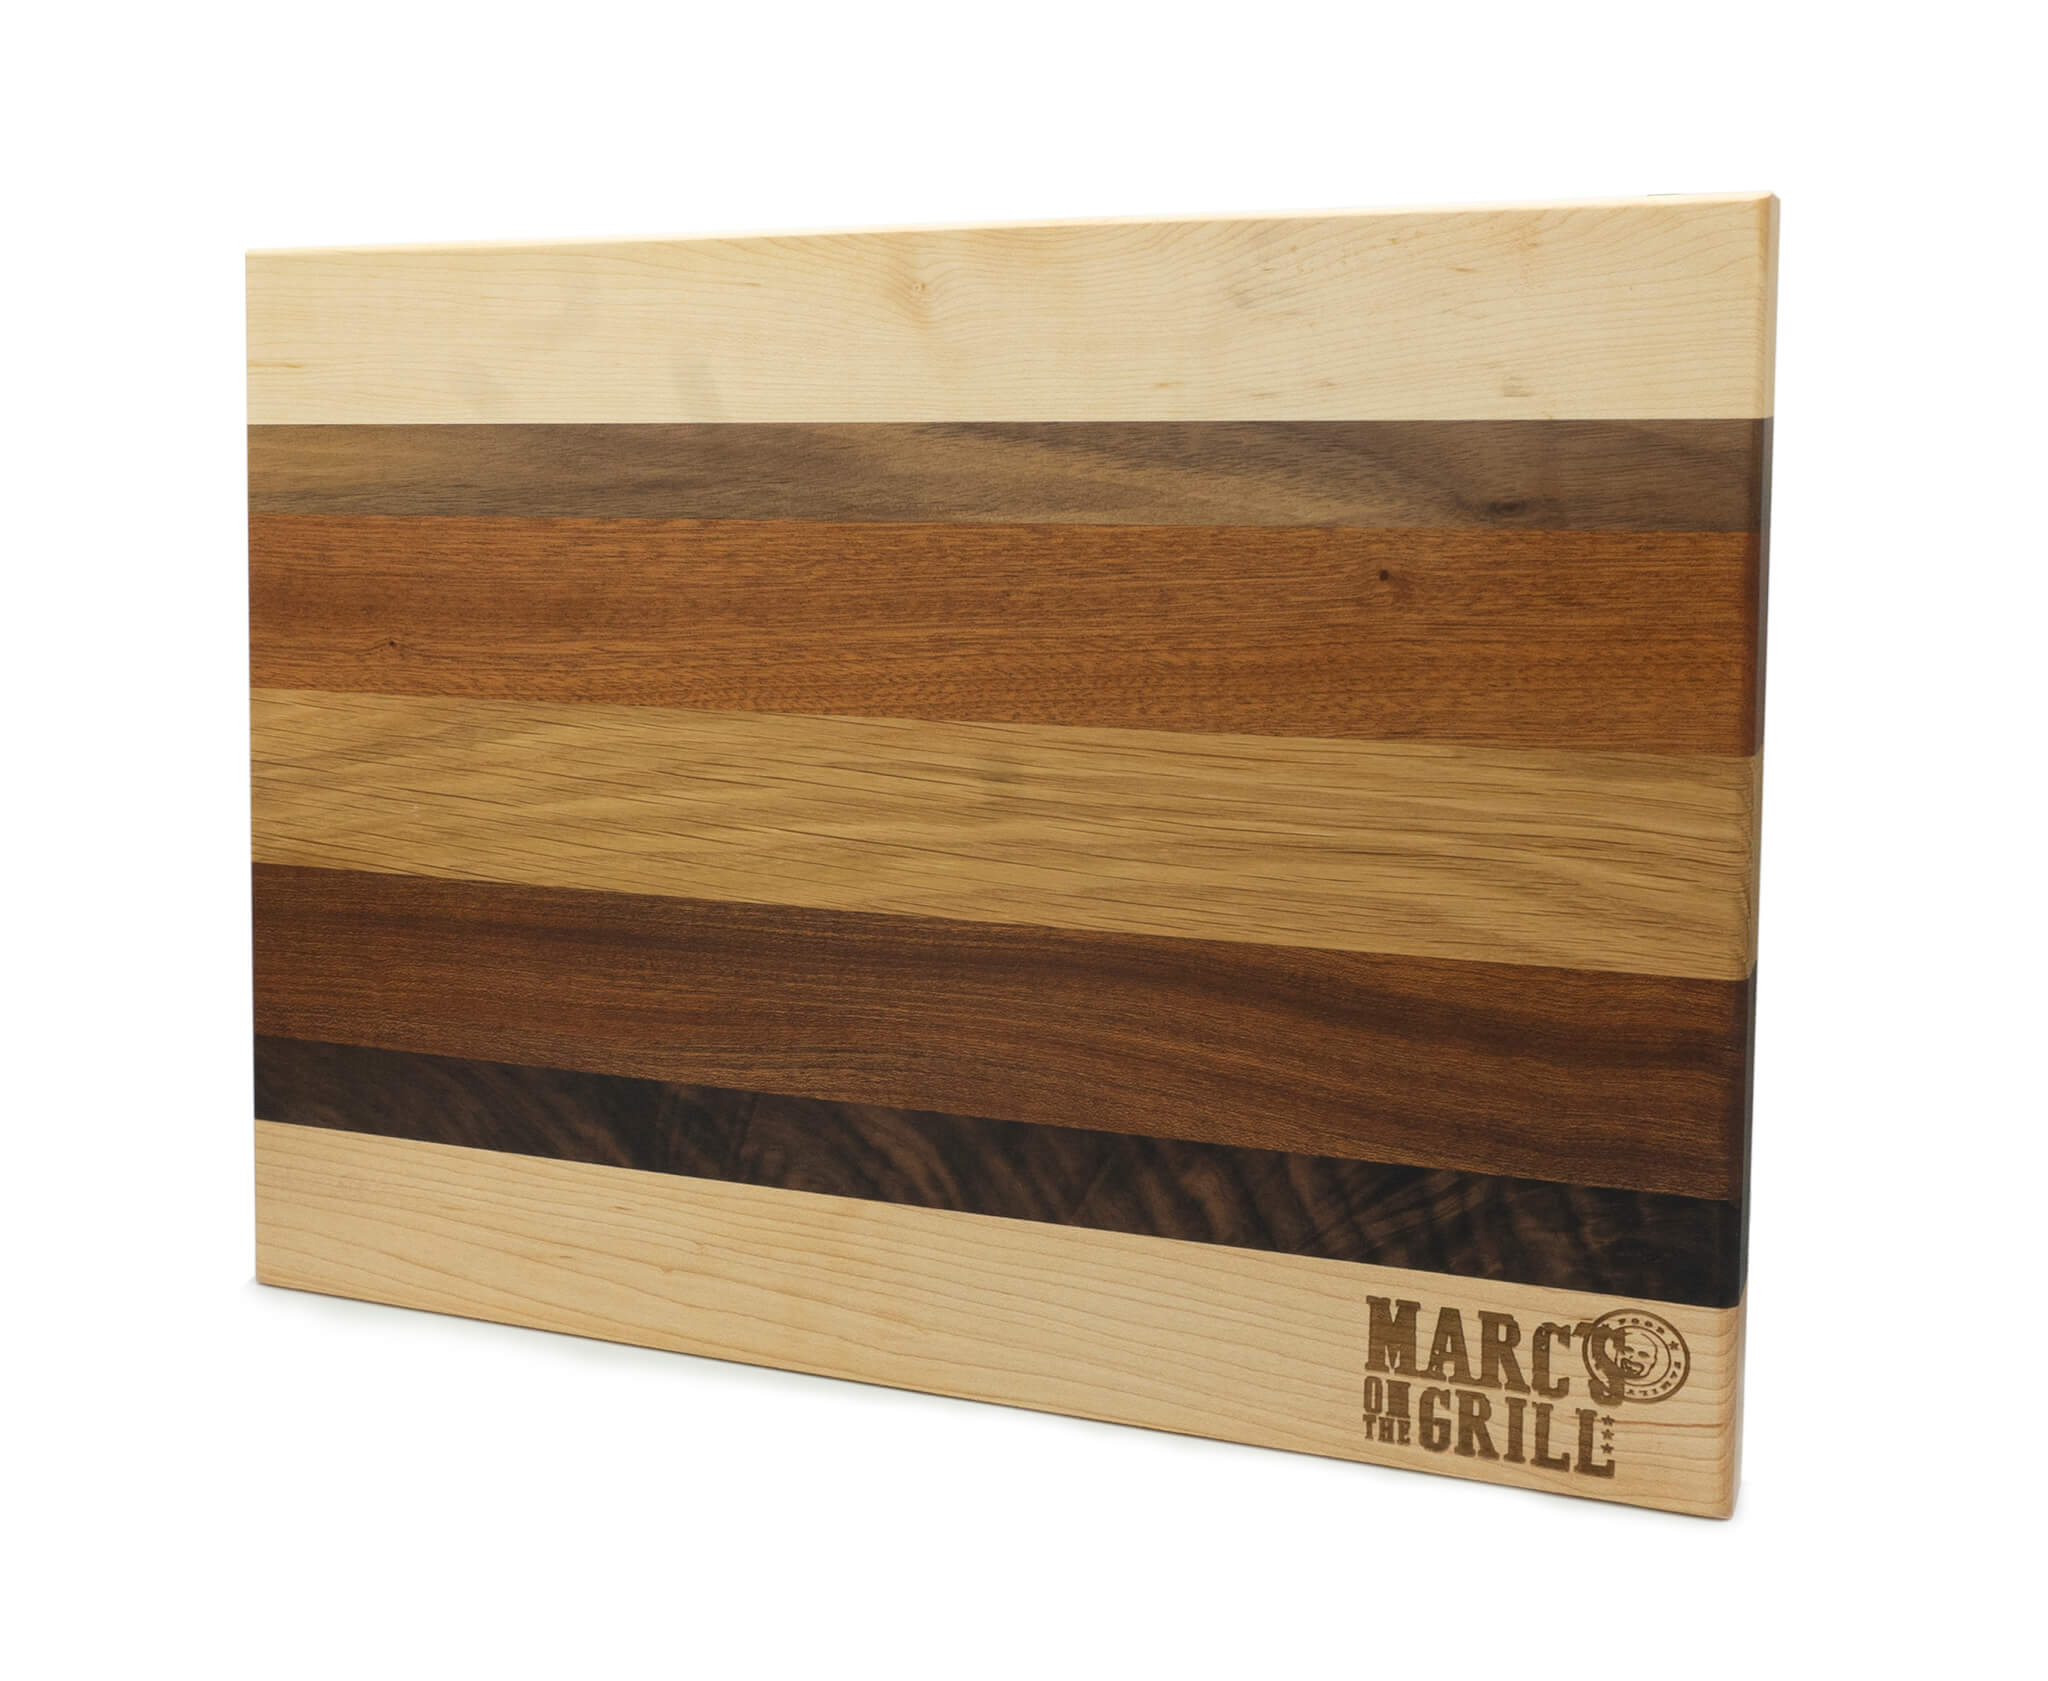 MOTG-SL11216 Cutting Boards 1 x 12 x 16 with Marc's on the Grill logo